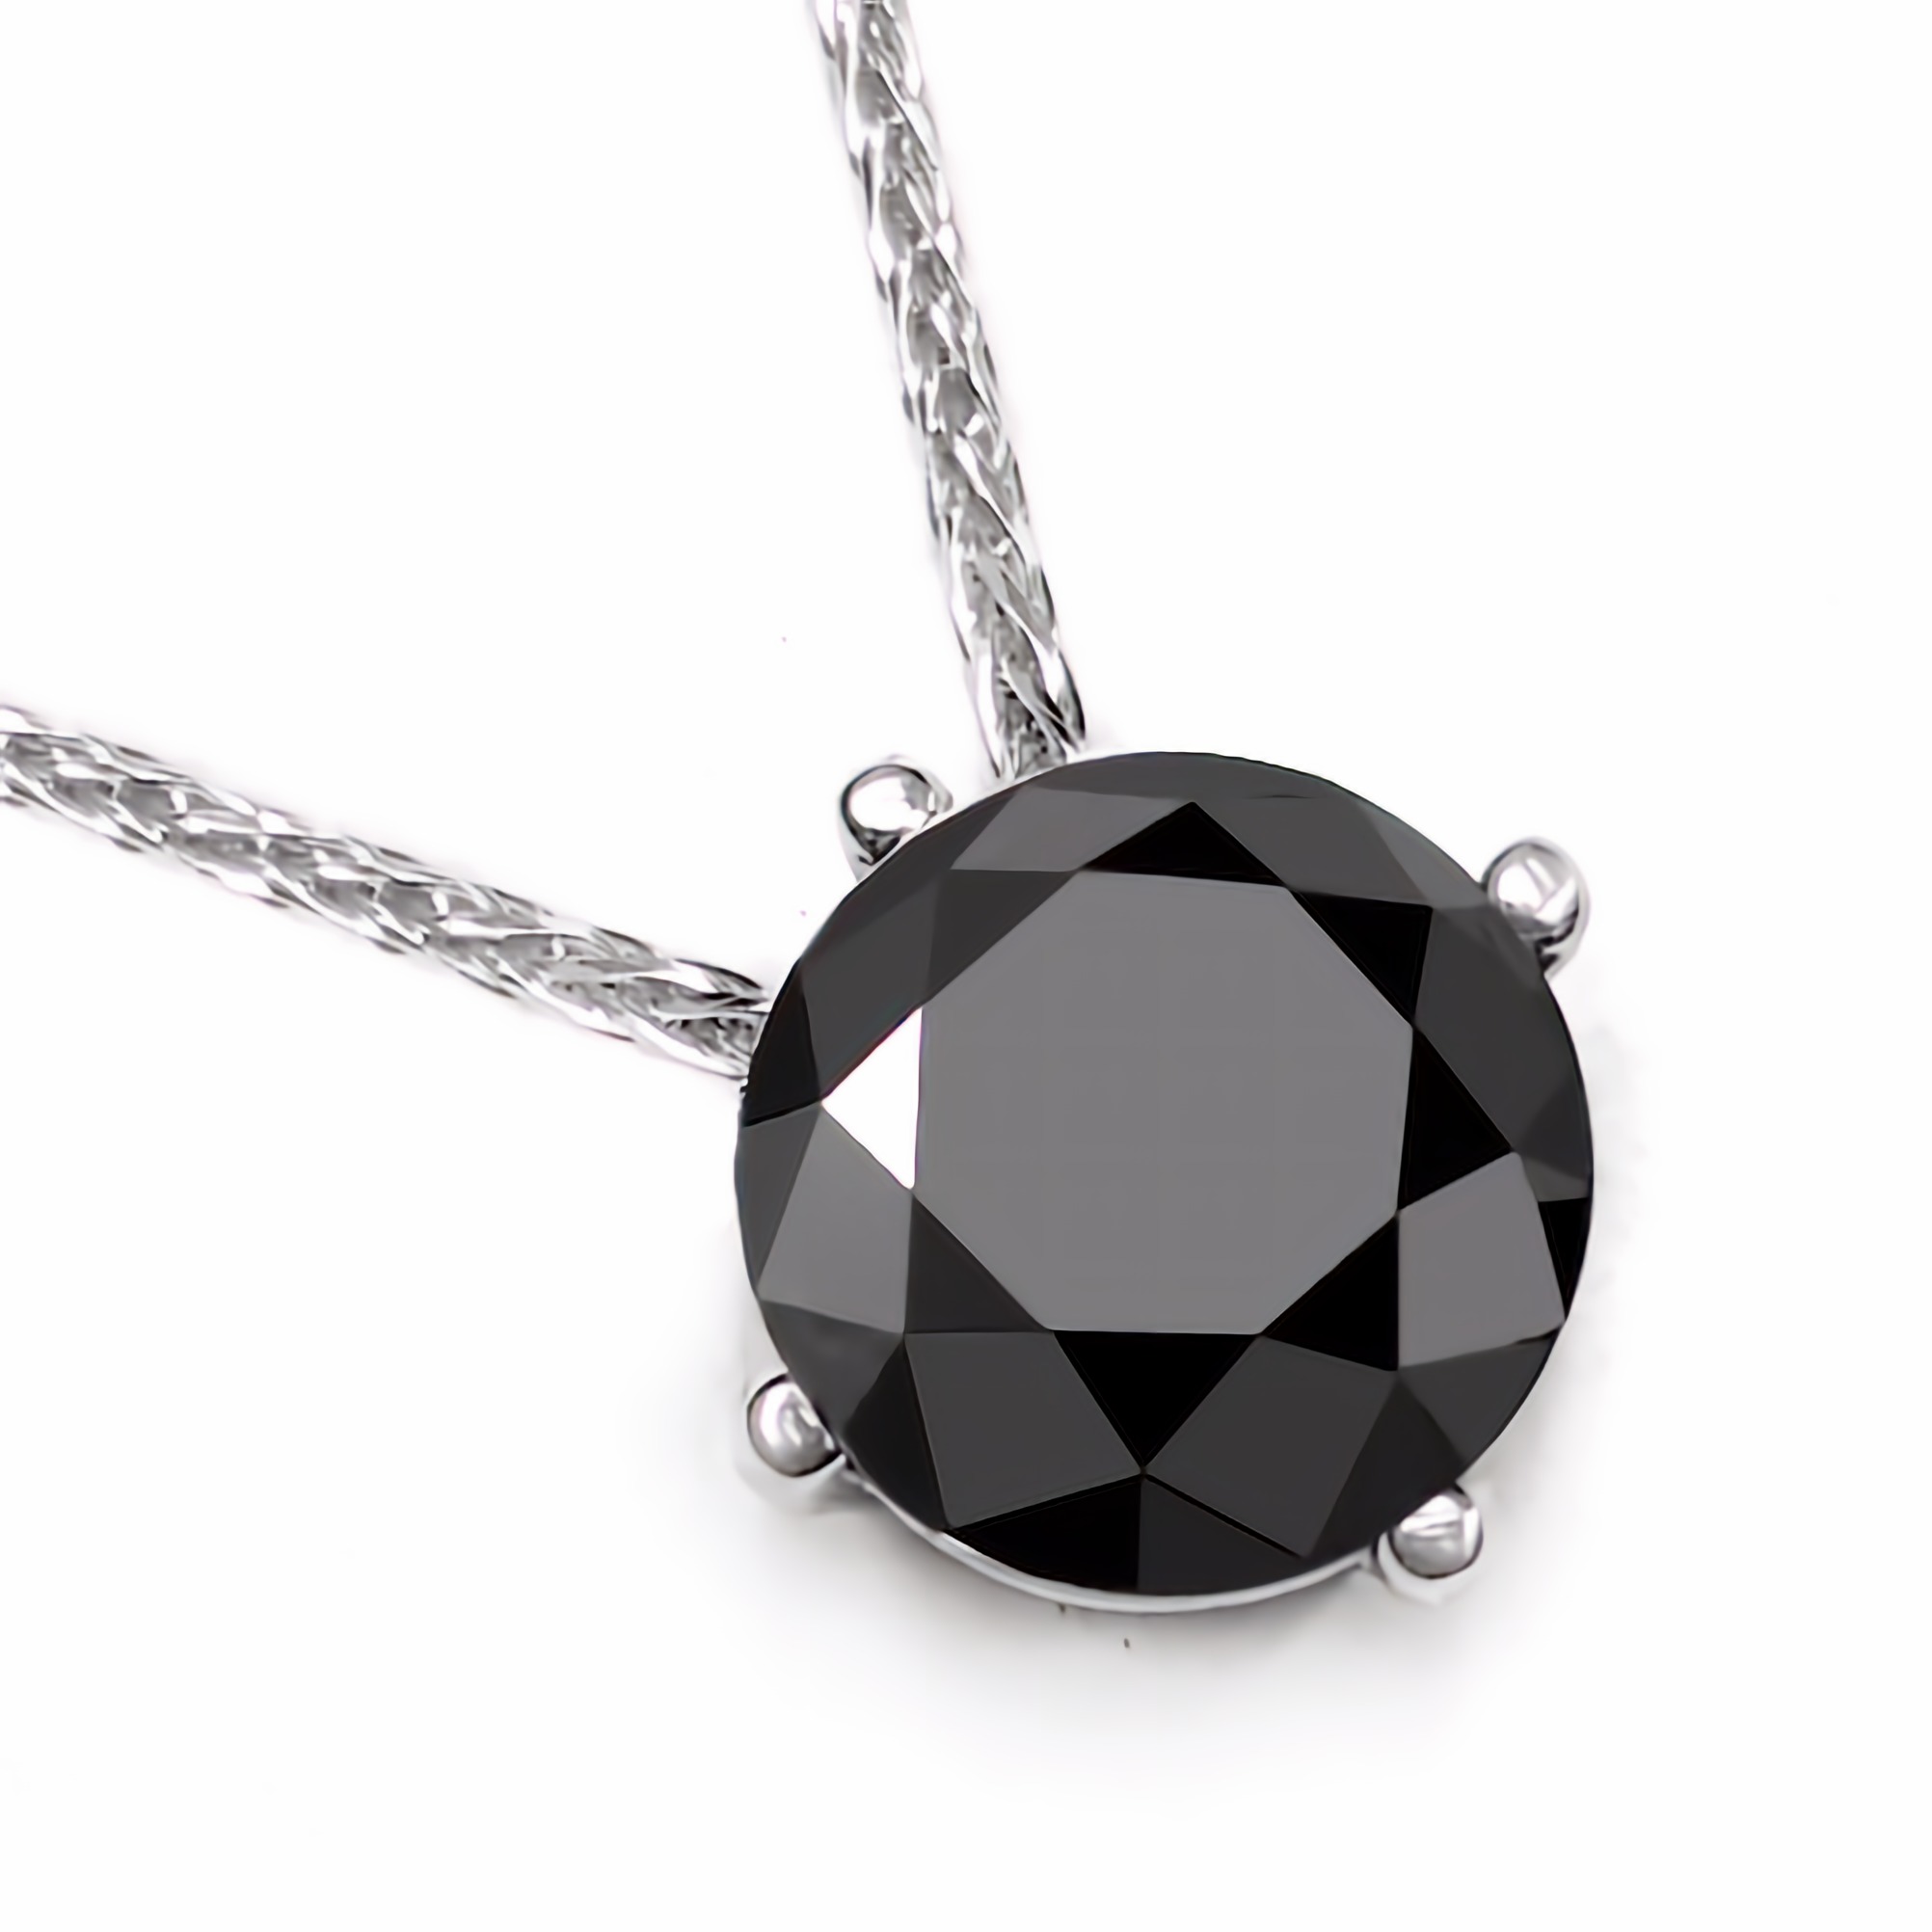 1/2 CT TW Black Diamond Tennis Necklace in Sterling Silver with Black  Rhodium Plated - 12LN3A